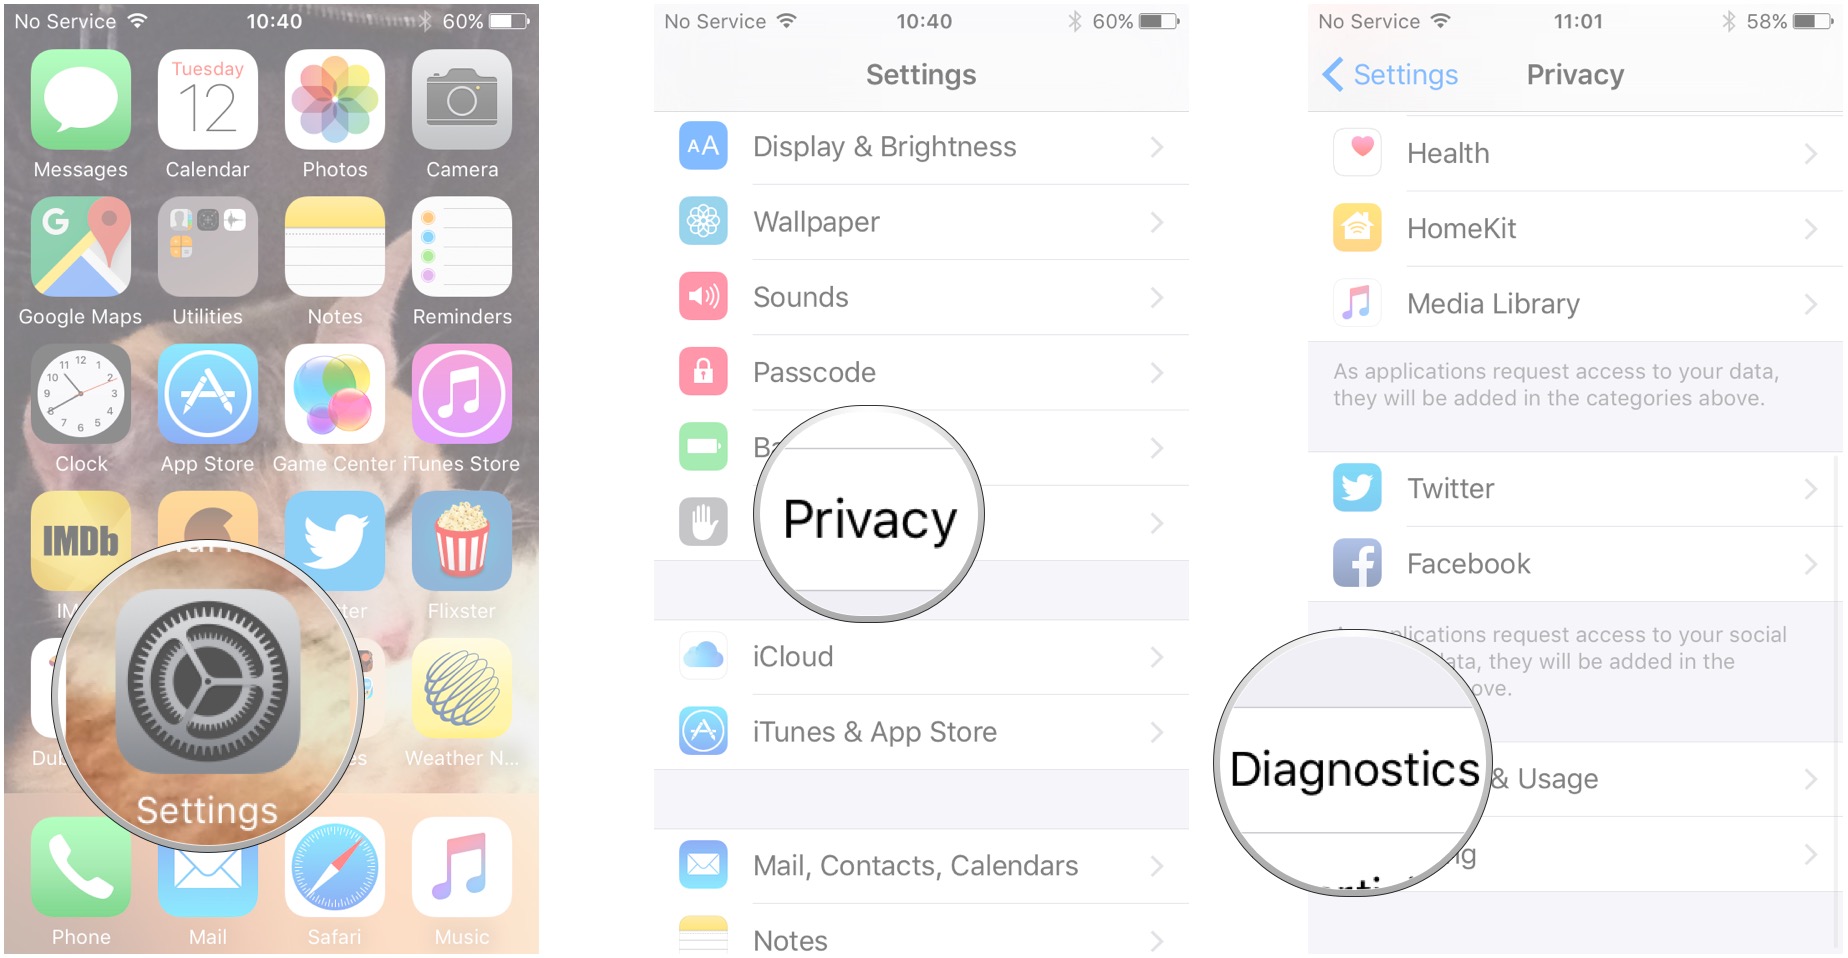 Launch the Settings app, tap Privacy, tap Diagnostics & Usage